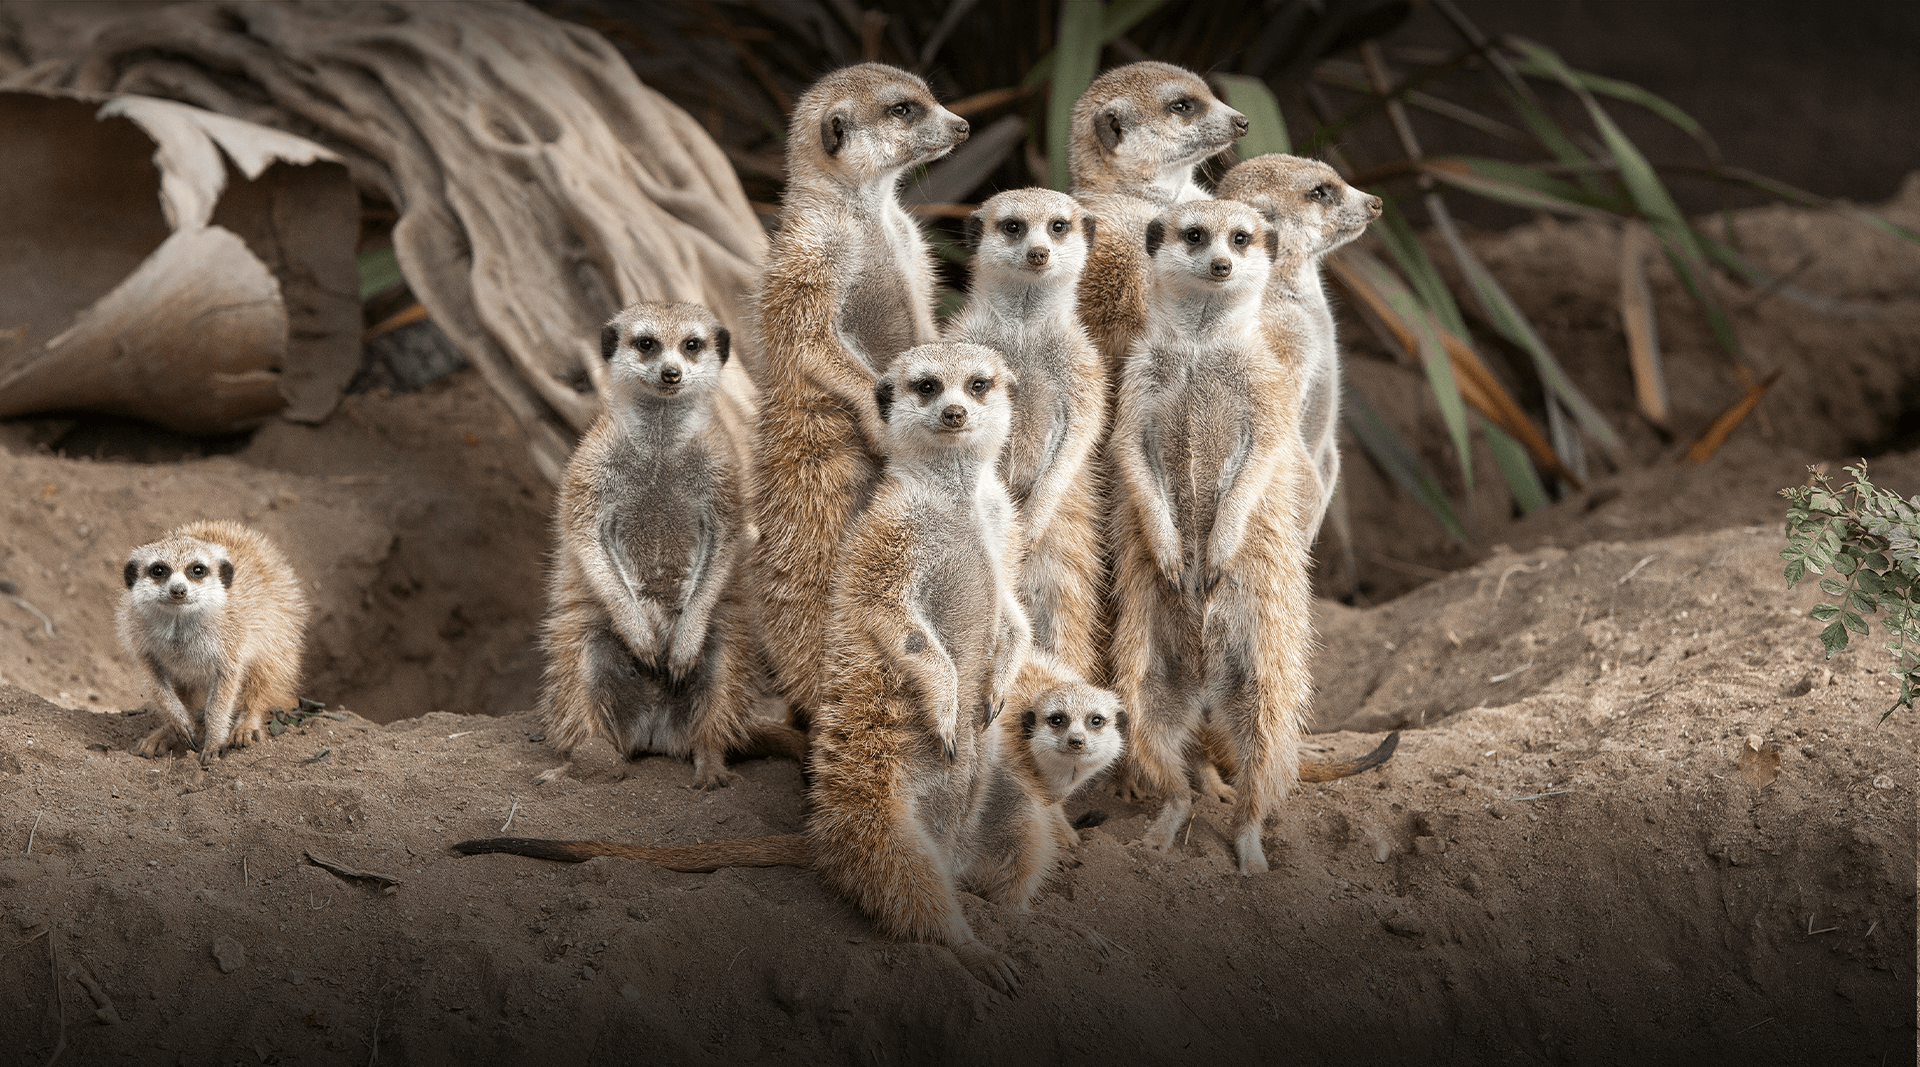 A group of meerkats look at the camera.